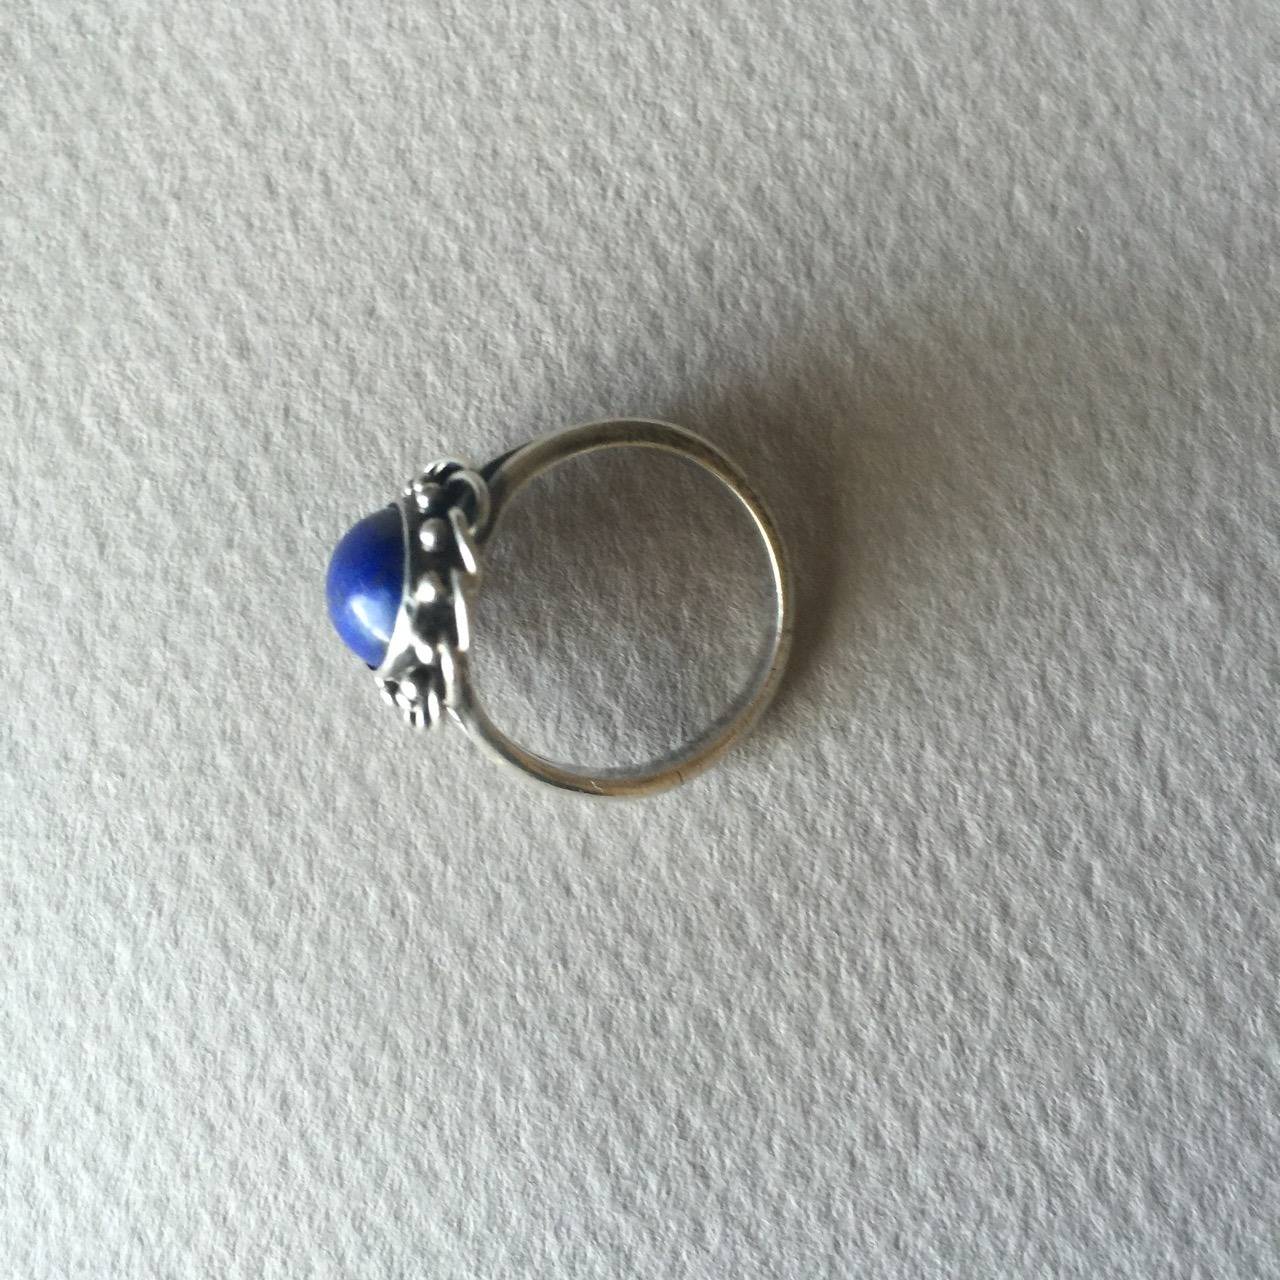 Georg Jensen Ring No. 26 with Lapis Lazuli.

This is an early example dates with 1920's hallmark and 830 silver. 

Very good vintage condition. Size 6.

Georg Jensen grew up in a small village Raadvad, 10 km north of Copenhagen. The close,